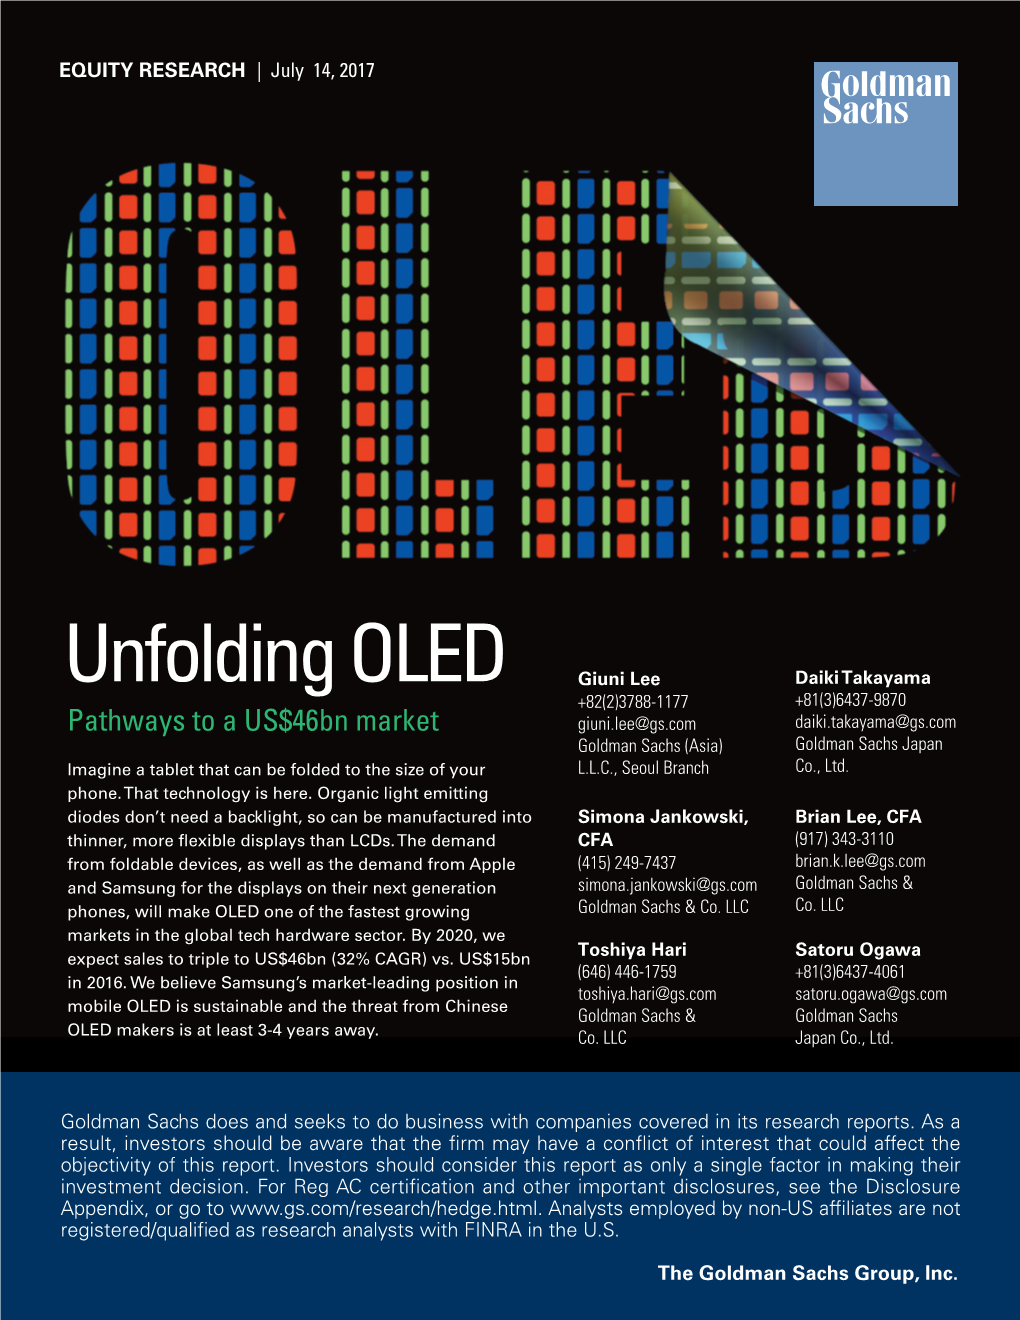 Unfolding OLED: Pathways to a US$46Bn Market